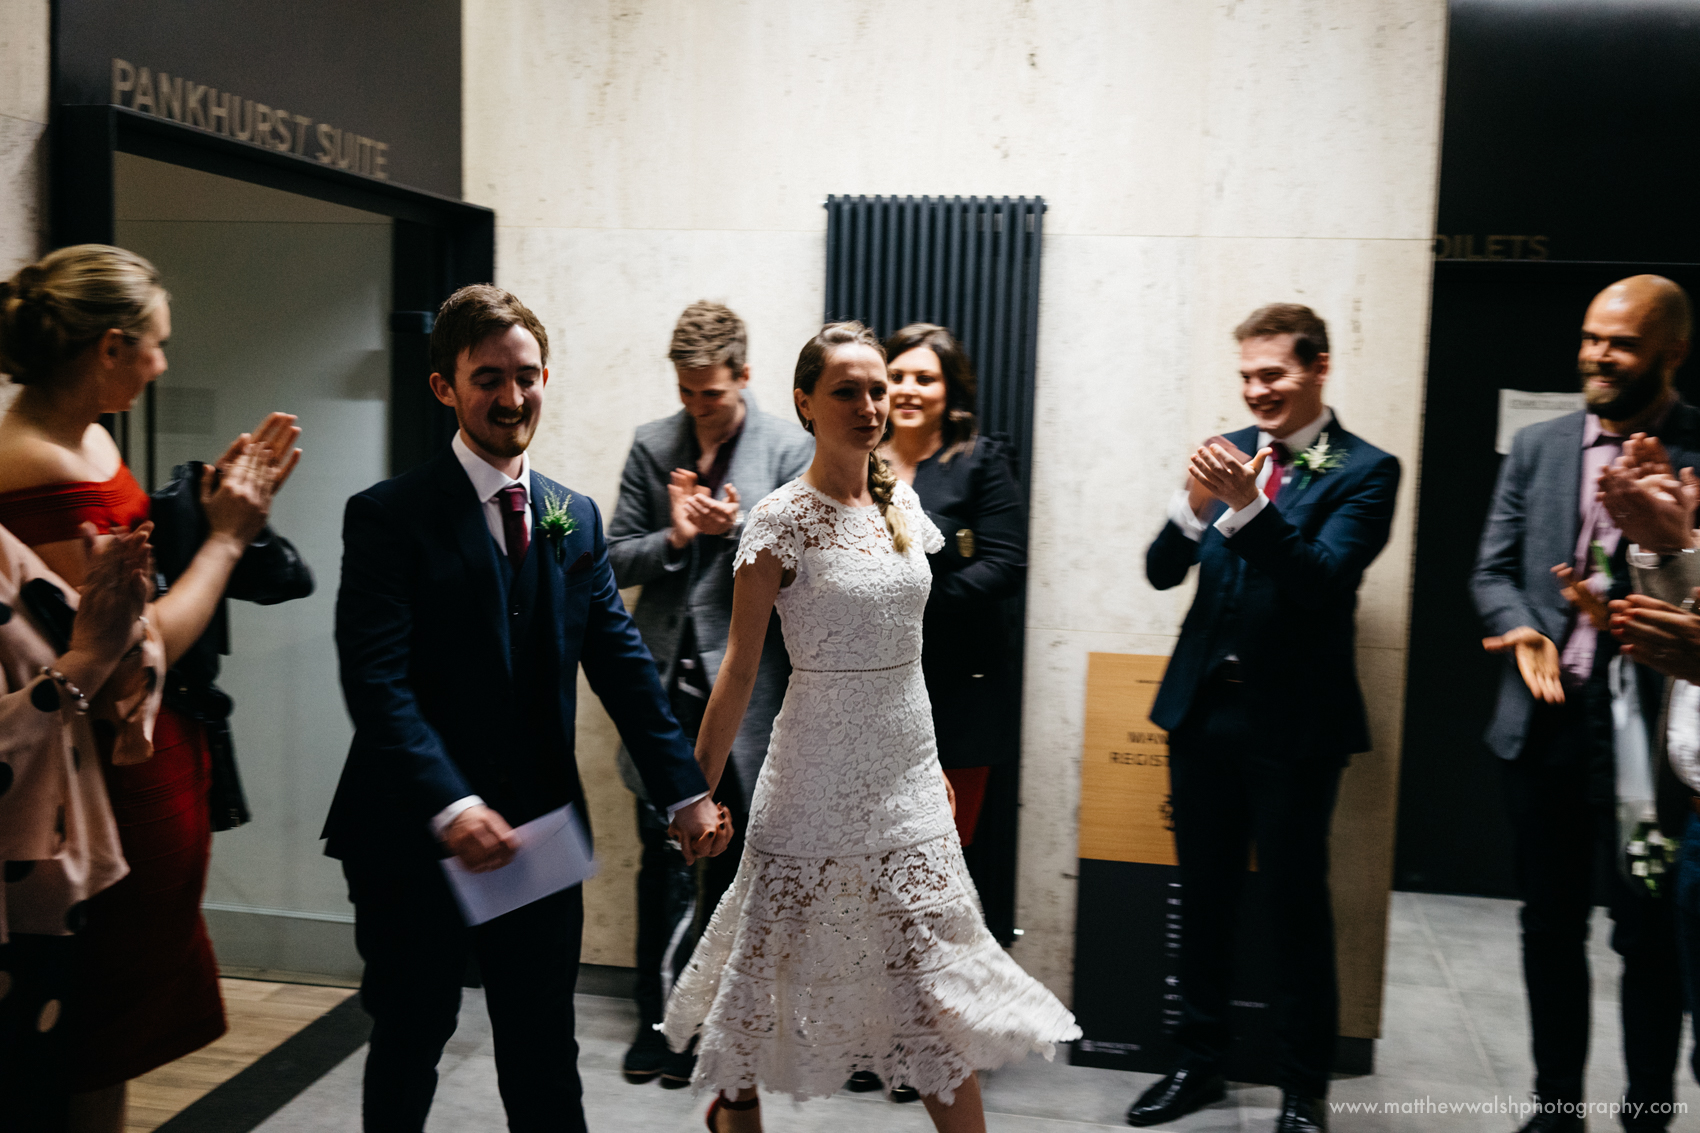 The bride and groom walk out of the ceremony venue to be met by their close friends and family